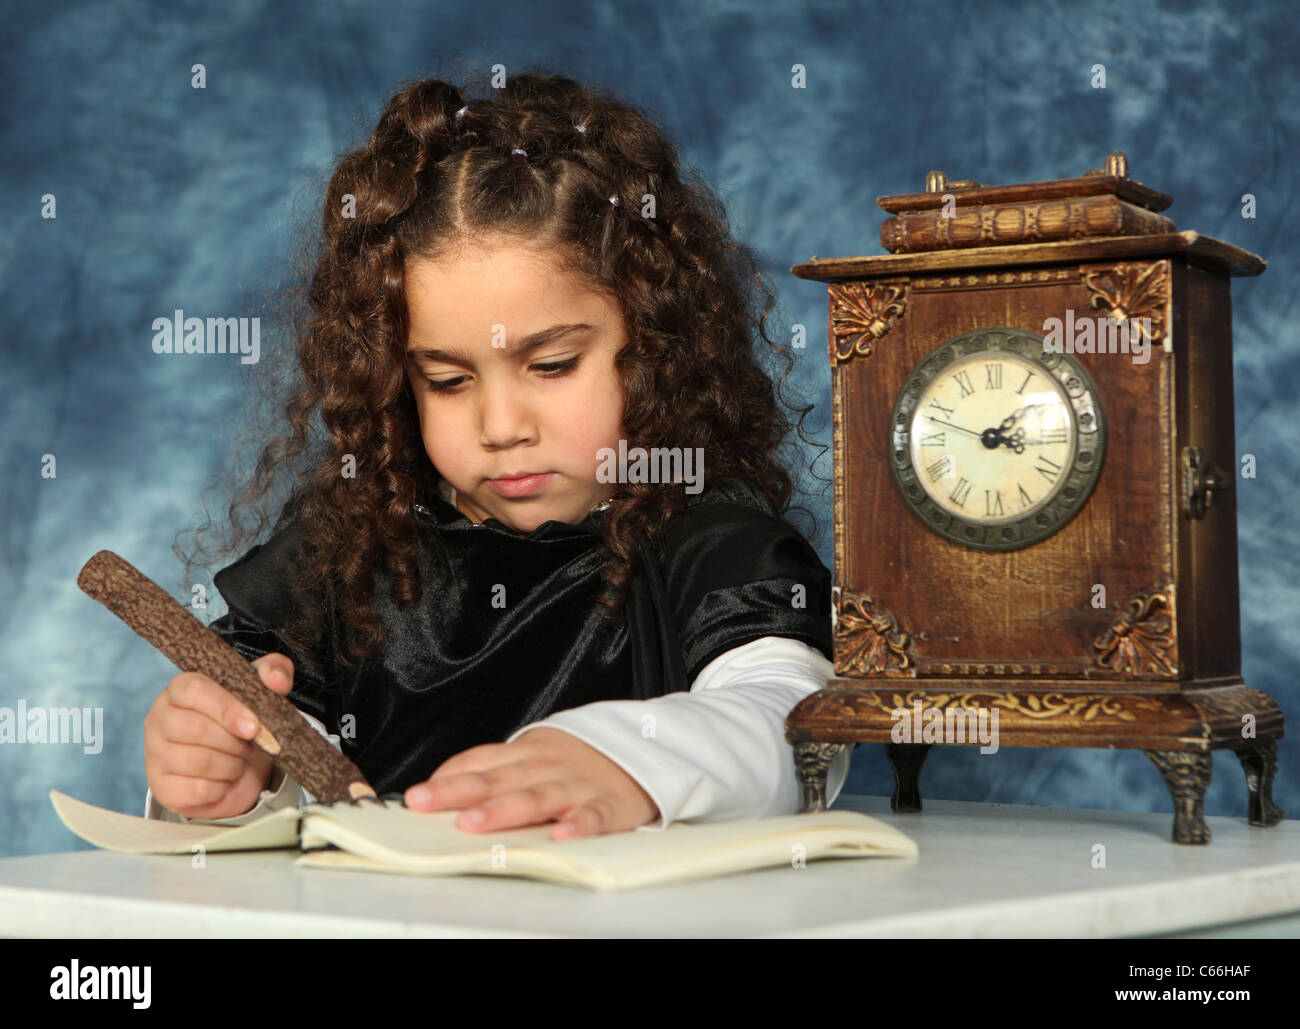 Atmospheric image of a sad lonely Girl of five doing homework next to an old style mantel place clock Stock Photo